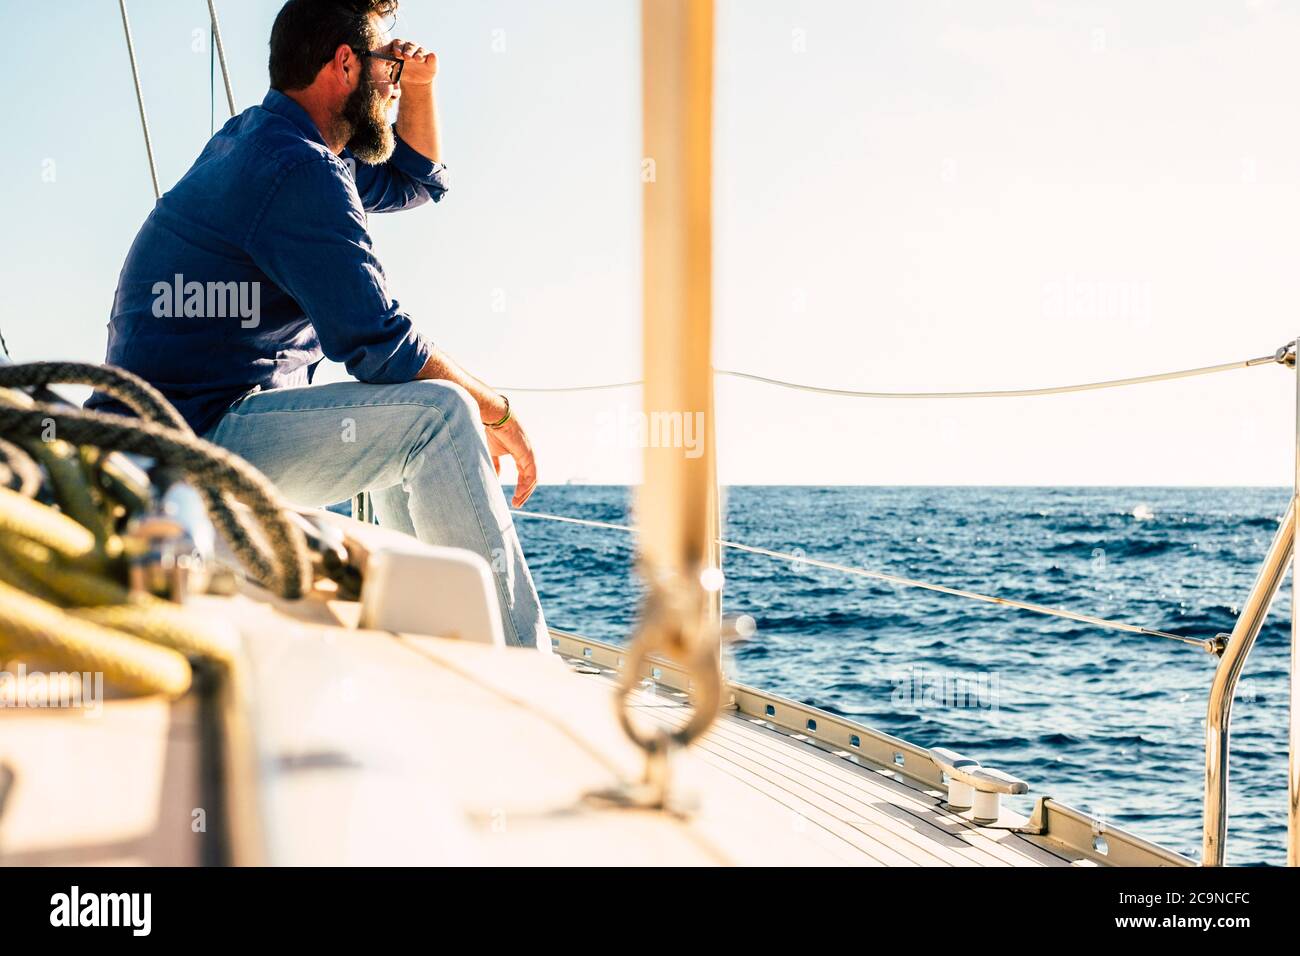 Adult man enjoy outdoor leisure activity sit down on a sail boat looking blue ocean and sky - concept of travel and freedom during summer holiday vaca Stock Photo